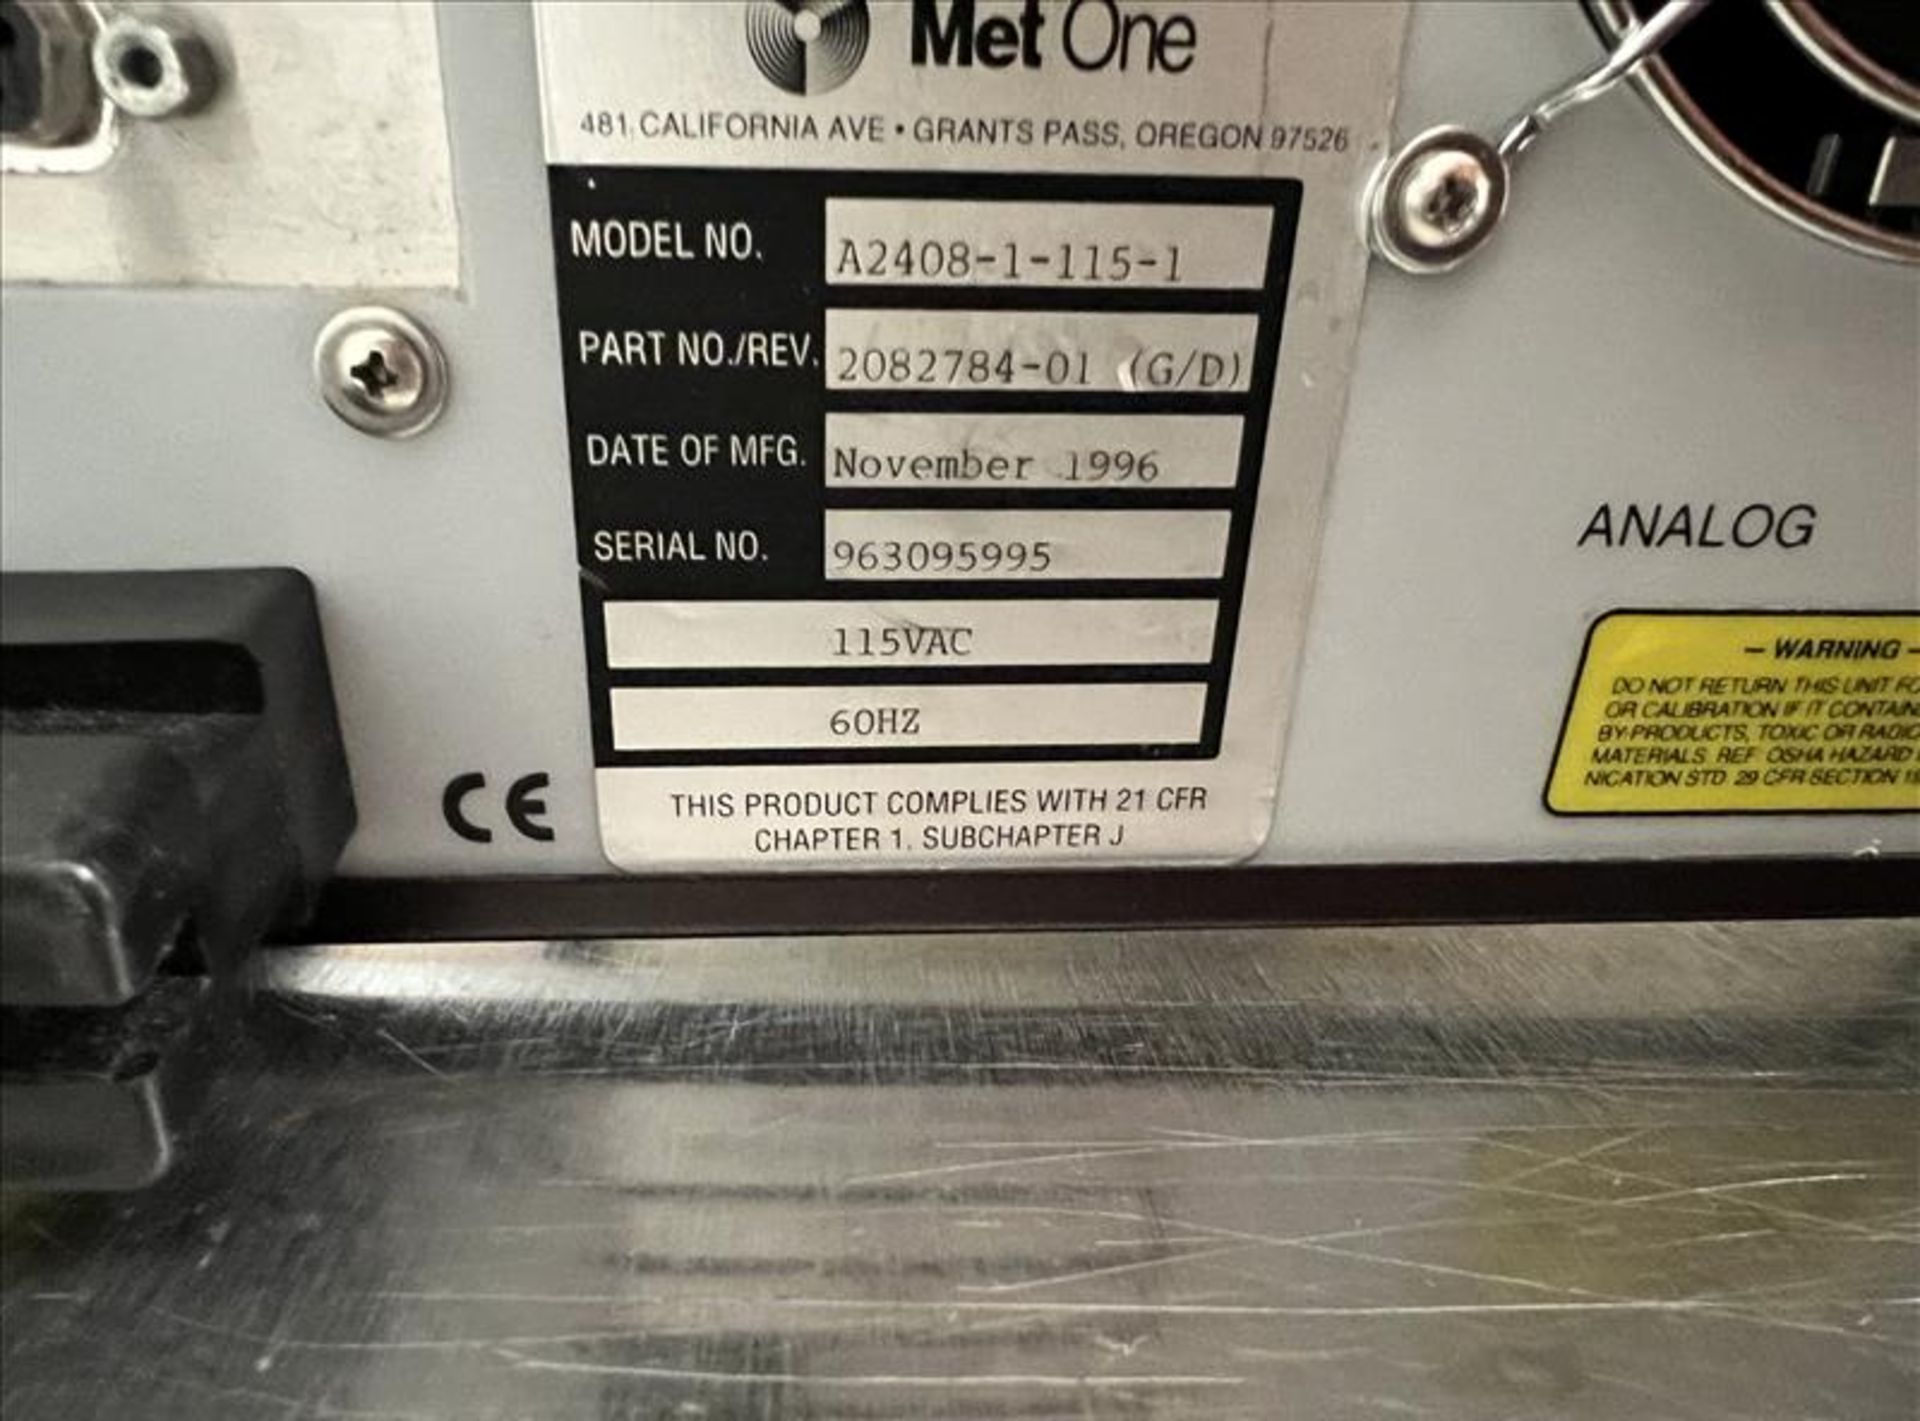 MetOne Laser Particle Counter mod. A2408-1-115-1 S/N 963095995 - Image 2 of 2